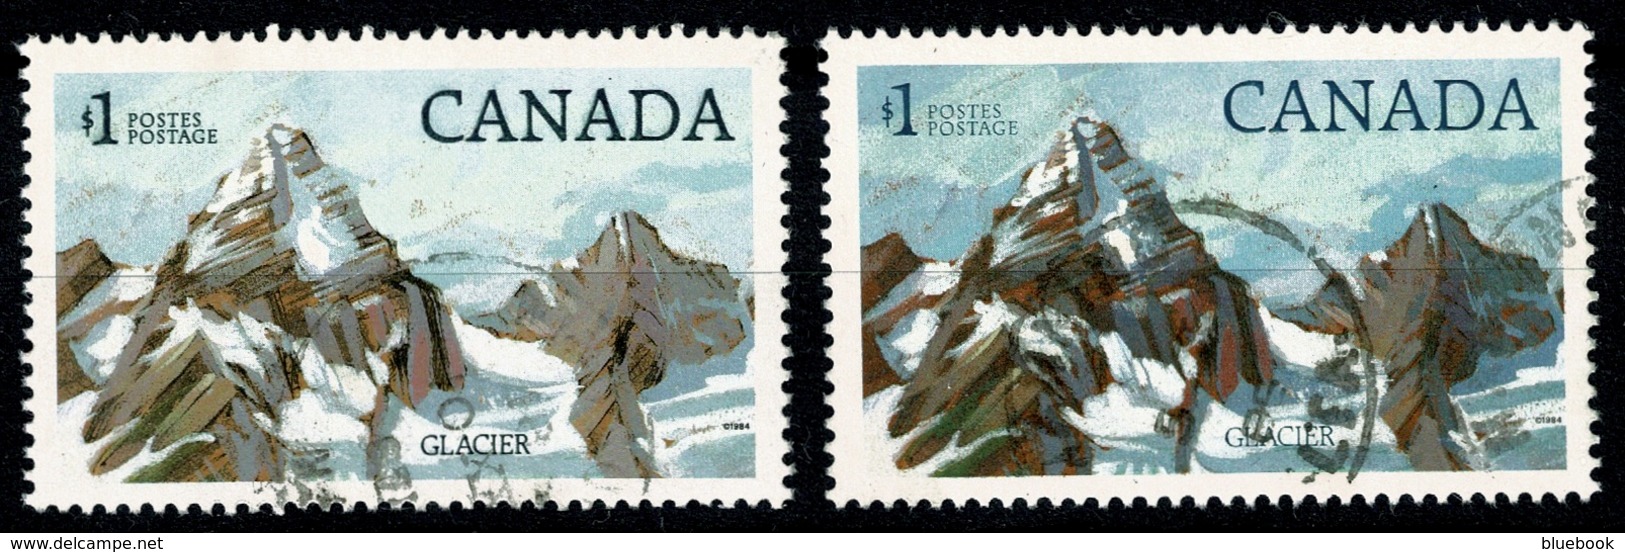 Ref 1290 - Canada 1984 Glacier $1 X 2 Used Stamp SG 884b - Colour Shade Varieny Variety - Used Stamps